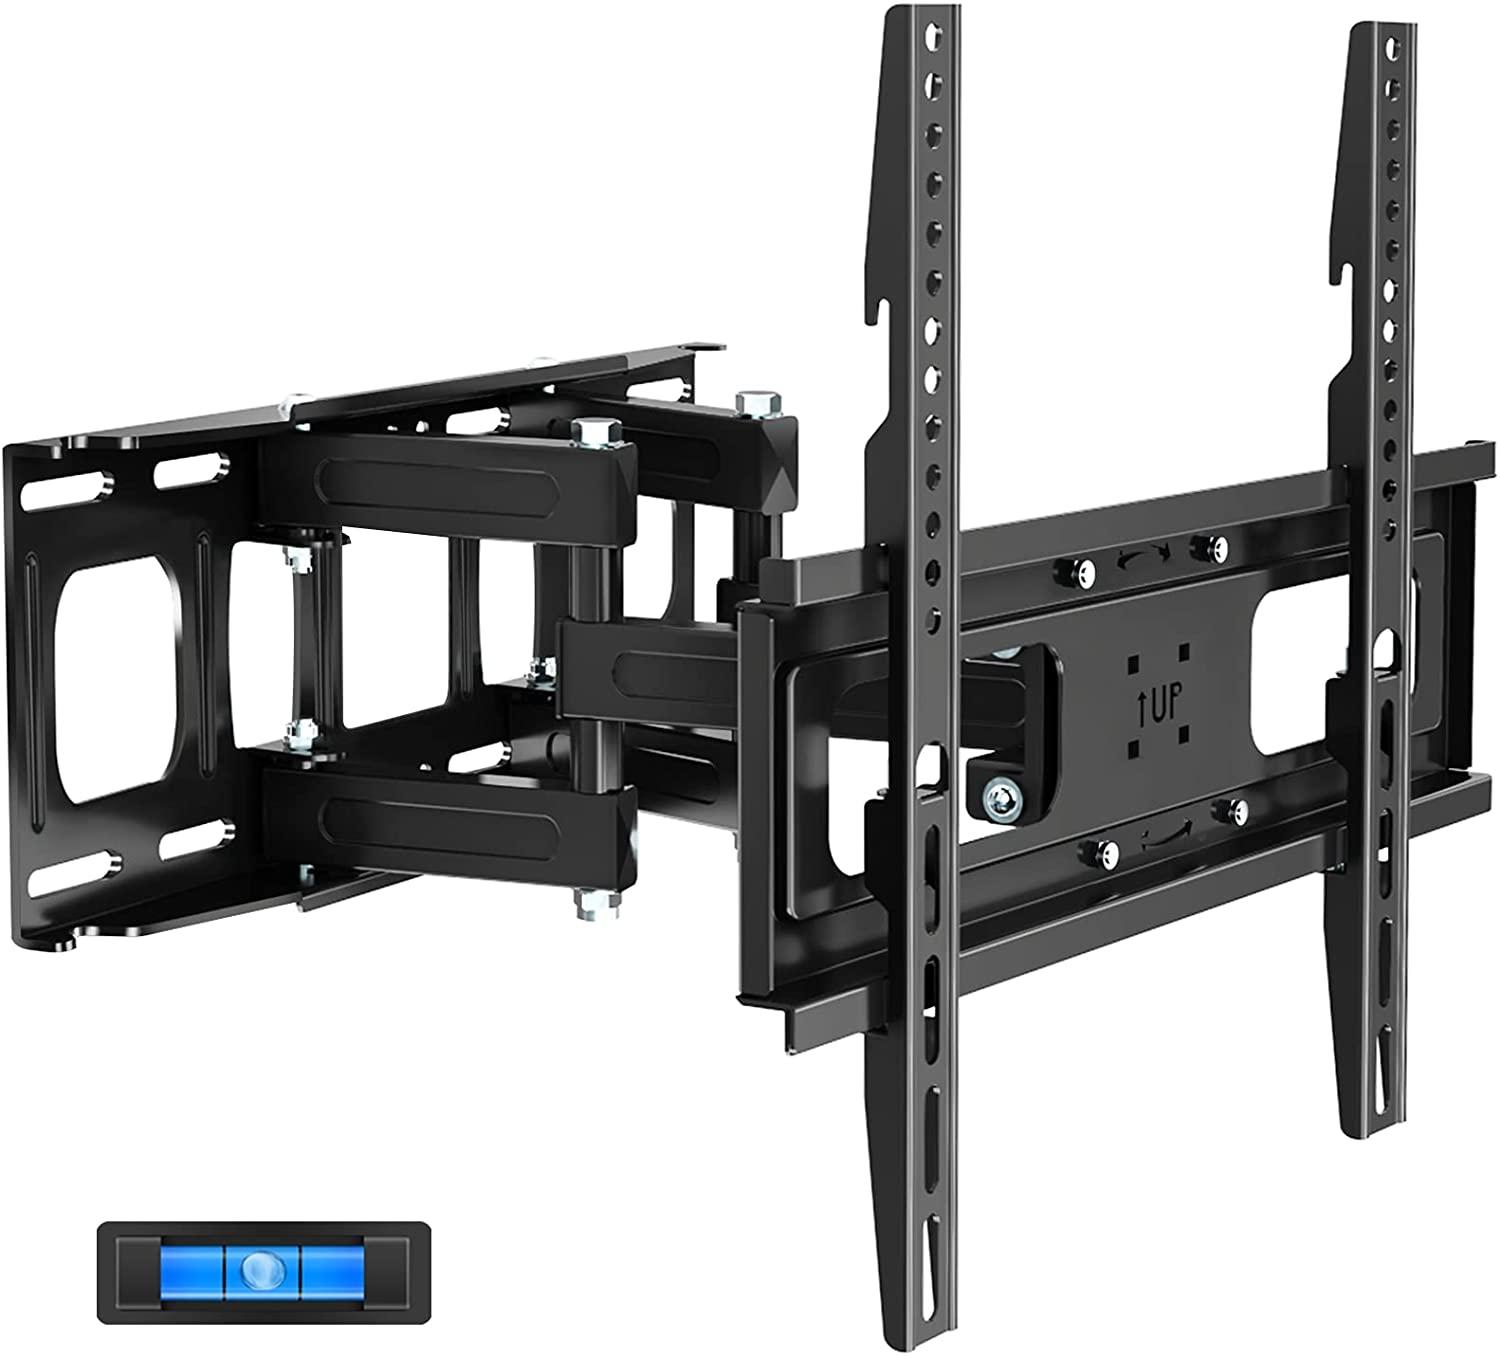 Juststone Full Motion TV Wall Mount Bracket for $11 Shipped